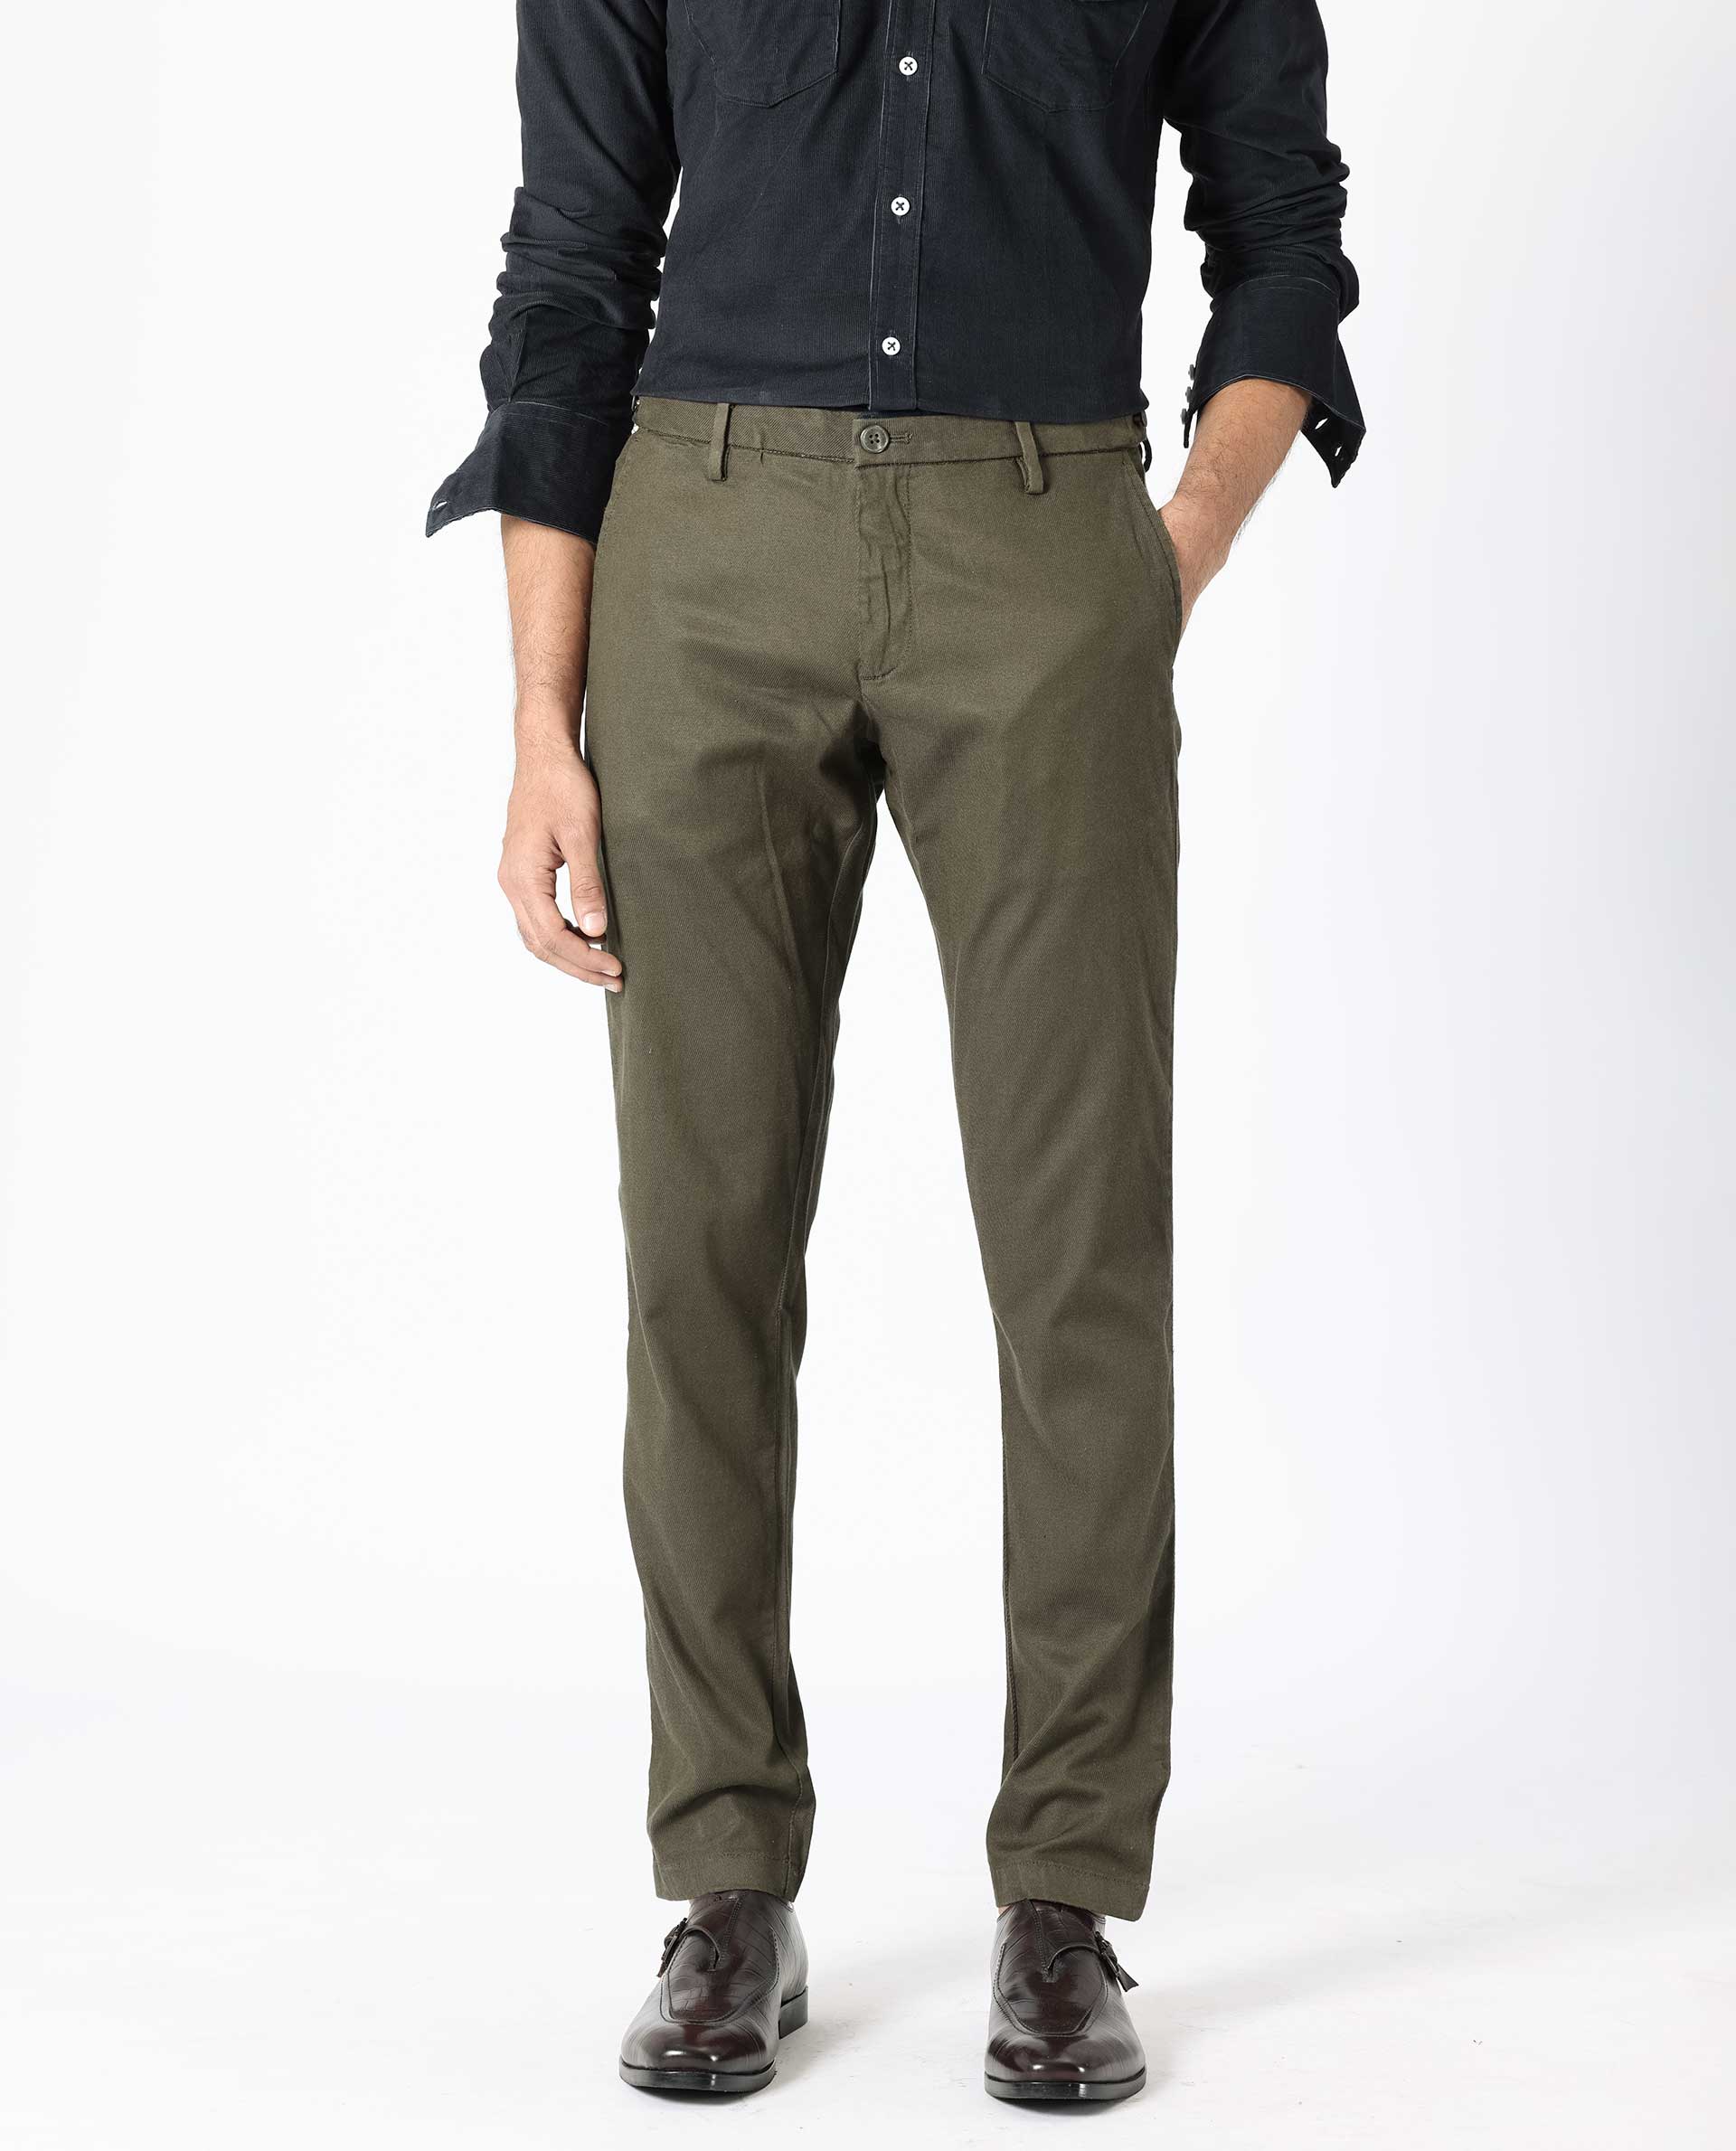 PAUL SMITH Slim-fit cotton-blend twill pants | THE OUTNET